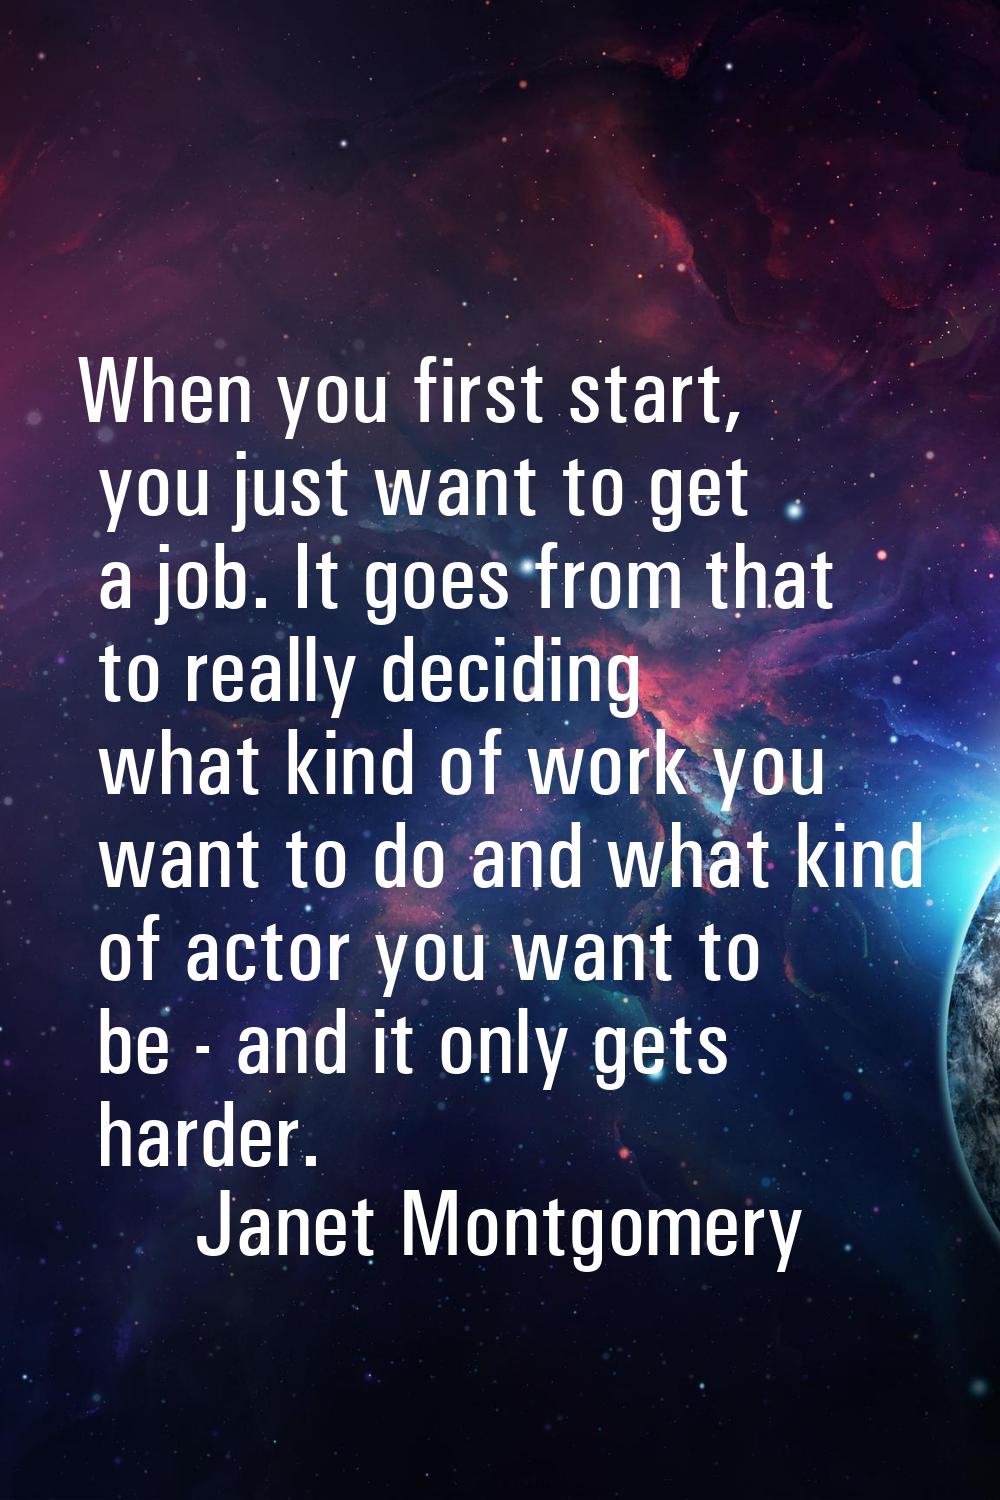 When you first start, you just want to get a job. It goes from that to really deciding what kind of